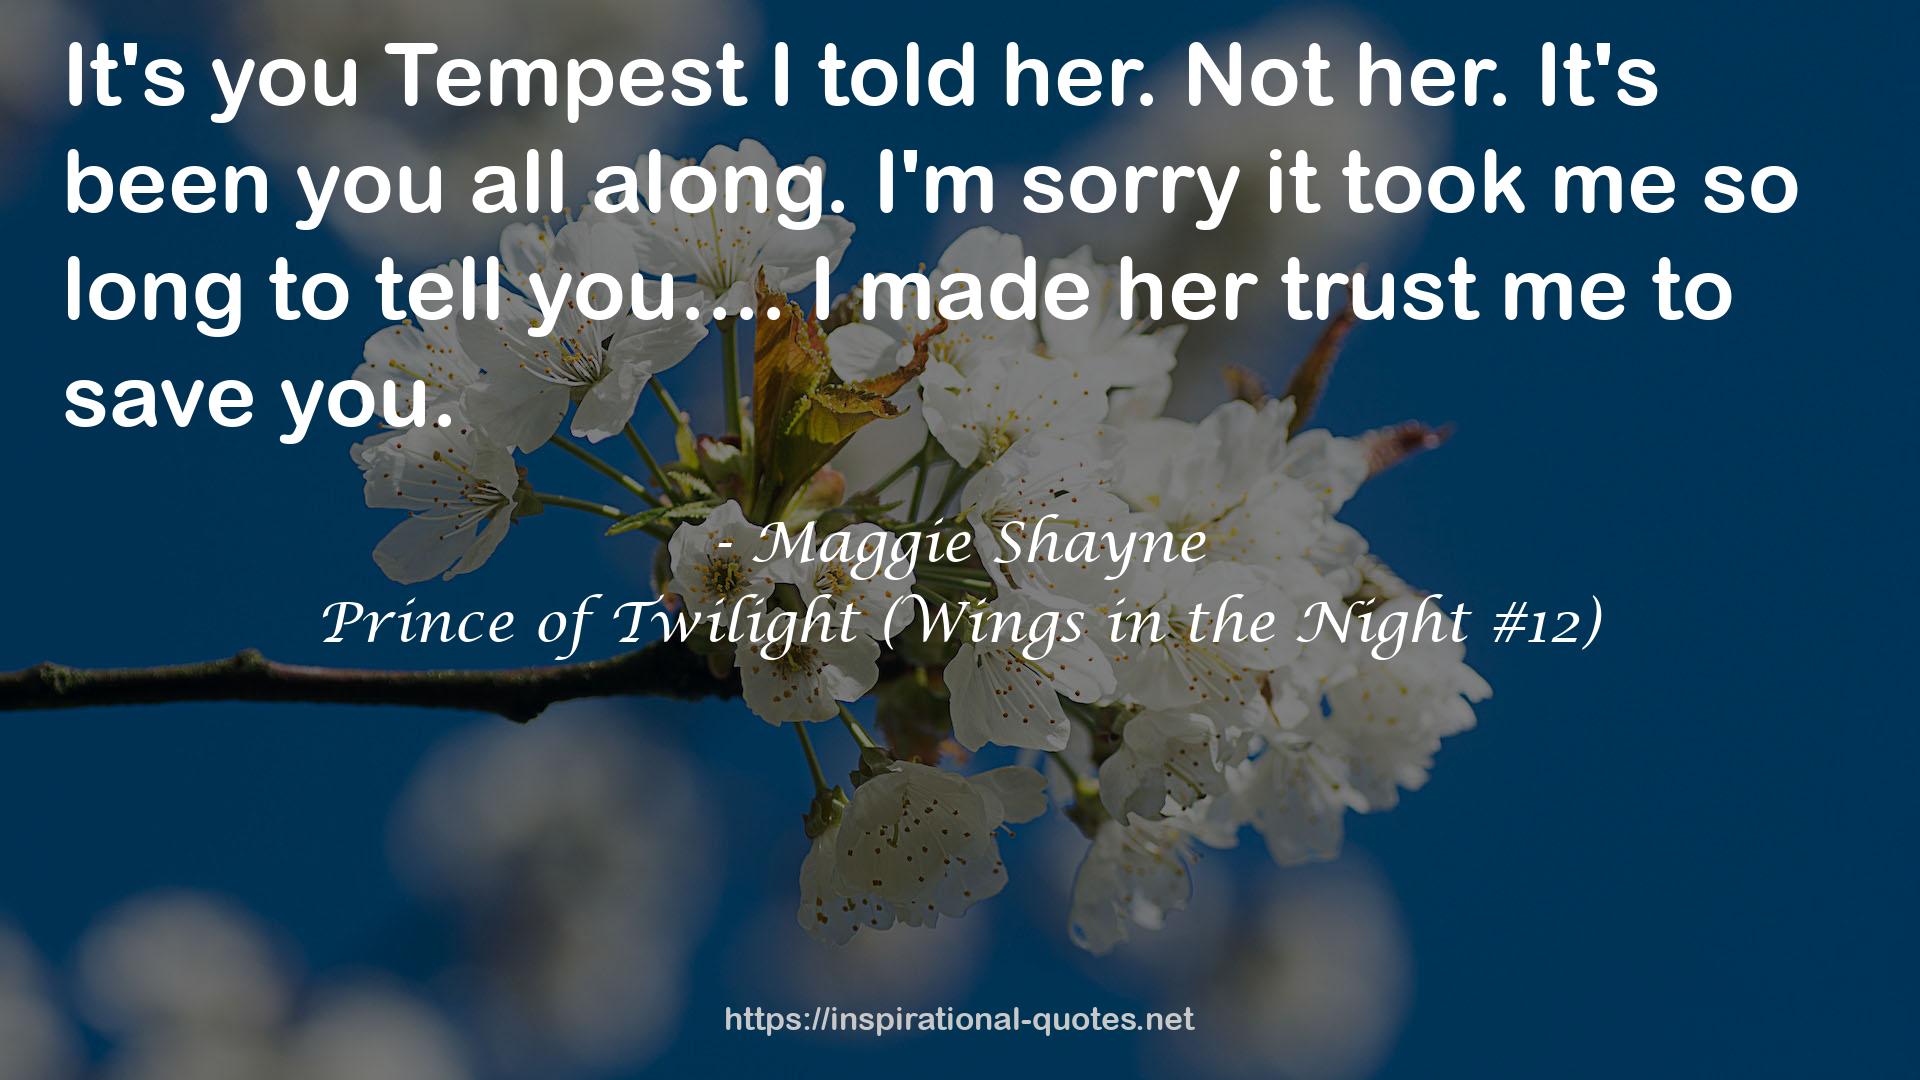 Prince of Twilight (Wings in the Night #12) QUOTES